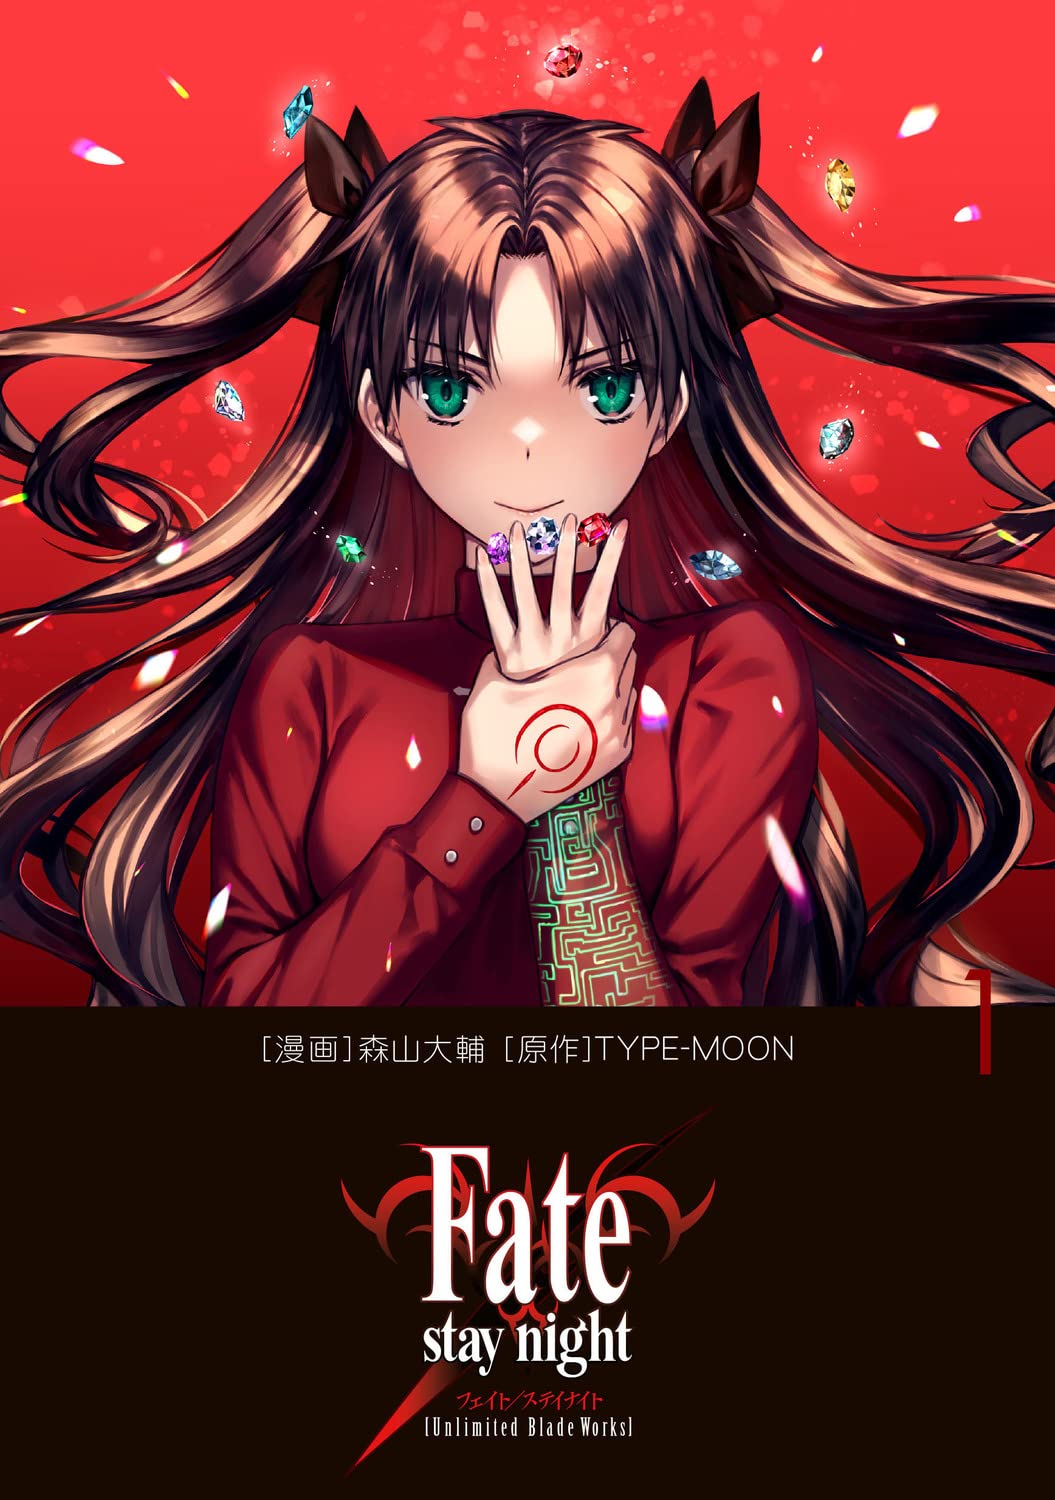 Fate/Stay Night Visual Novel - Part 1 - The Will to Survive [FATE] 